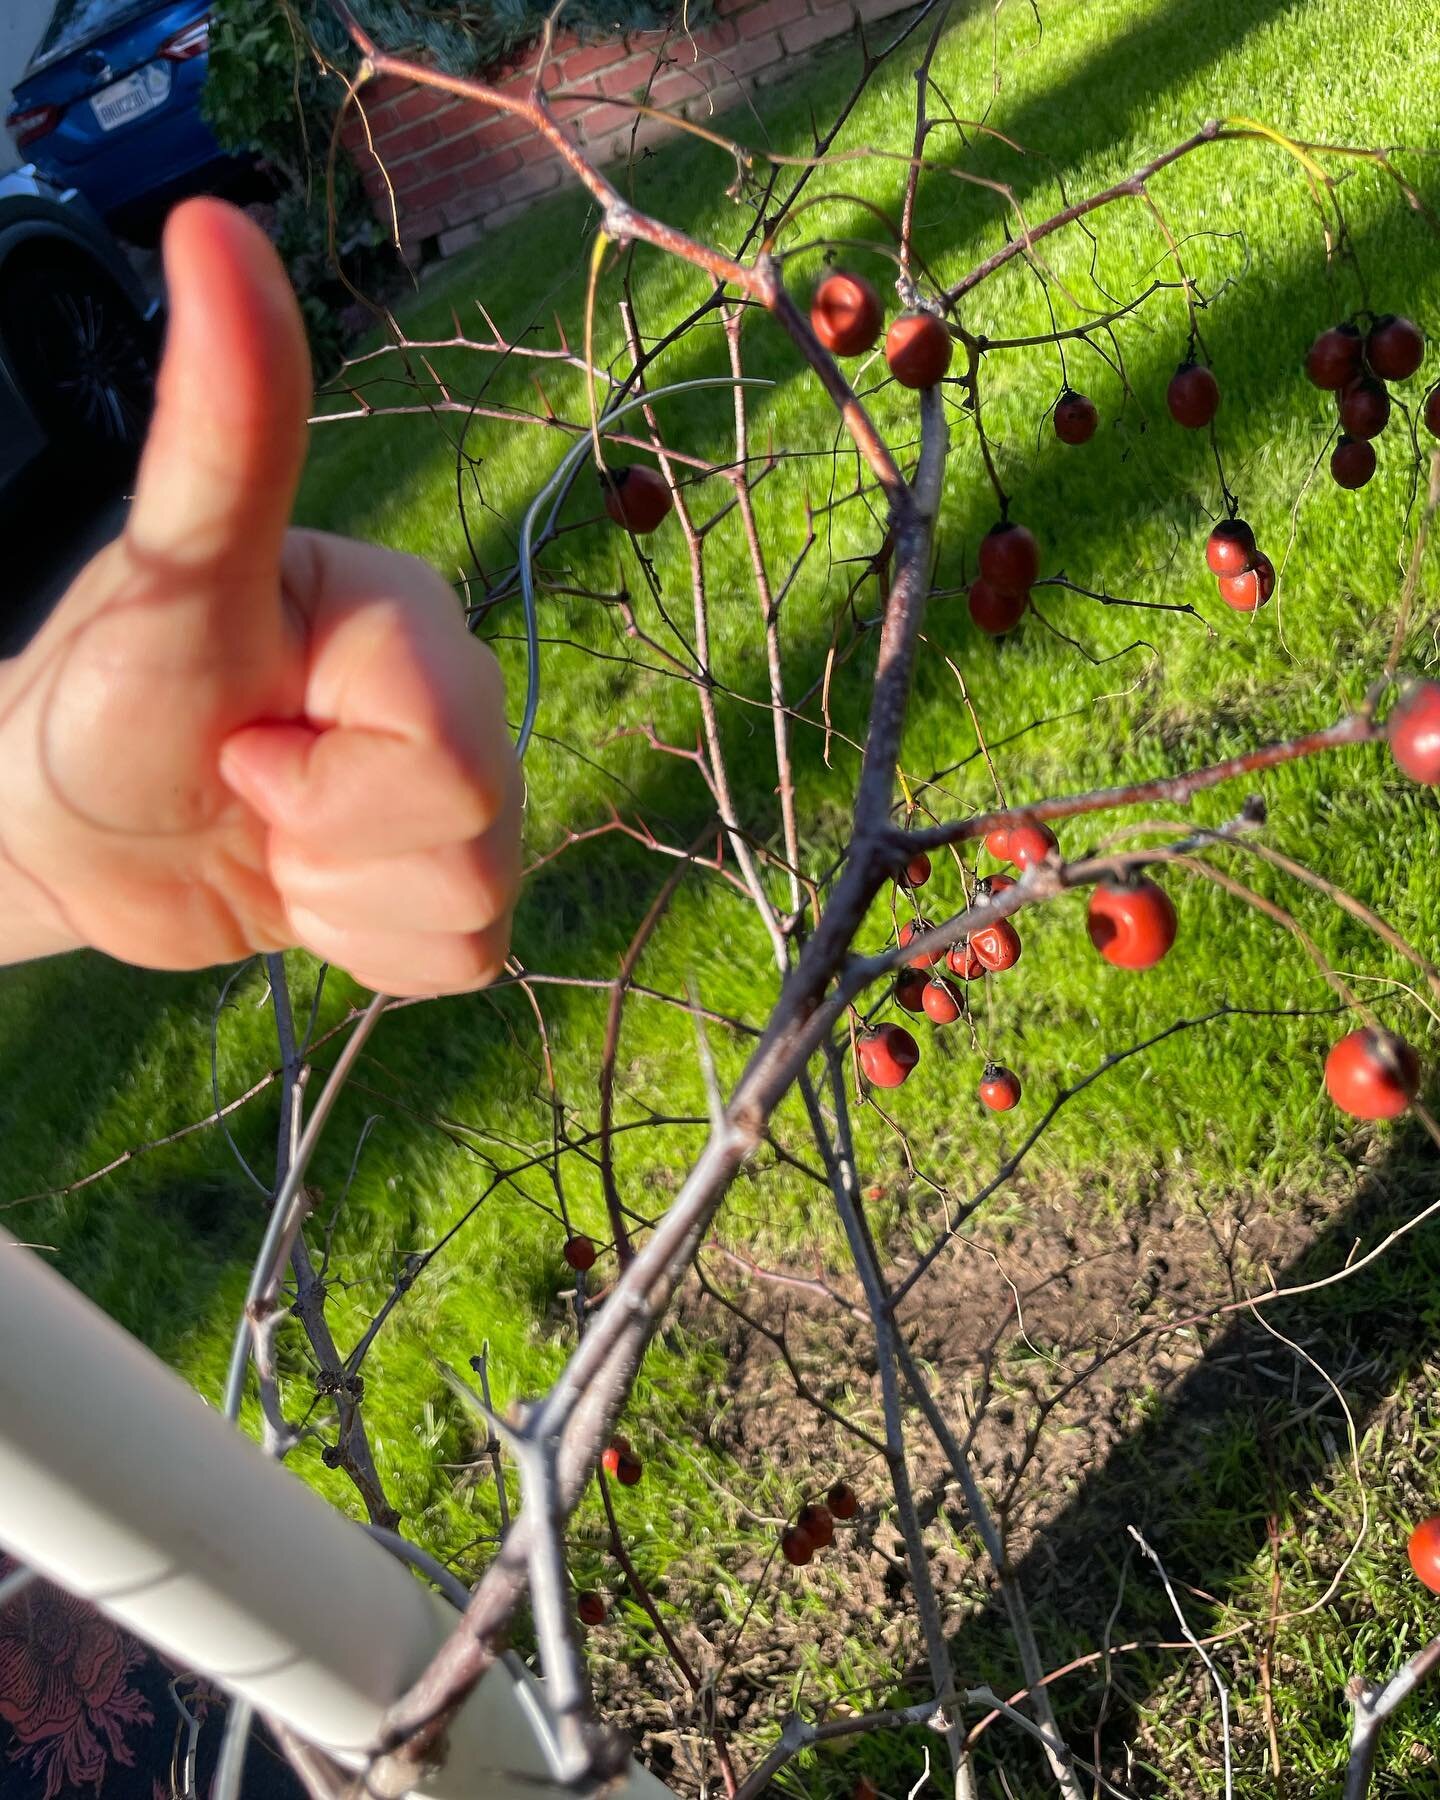 My brother-in-law @zombiexla grew this jujube tree for me.  Actually, the tree grew itself from its mother nearby, and the BIL gave it protection while it did so.  Through much effort on @ignaciogenzon &lsquo;s part, once it was big enough we brought